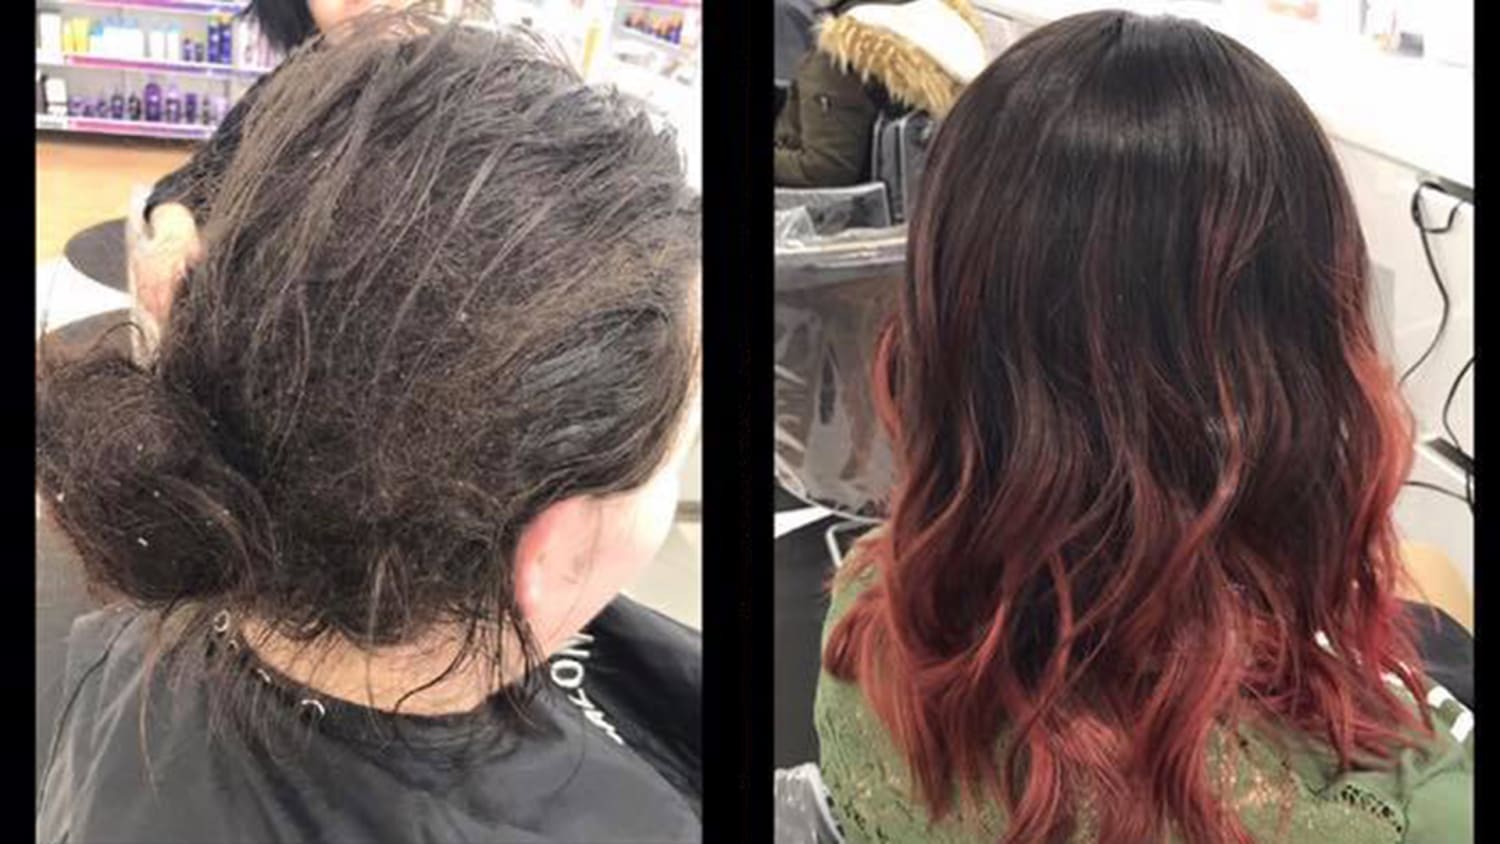 How hairstylist Kate Langman helped a woman with severe ... - Today - Today.com